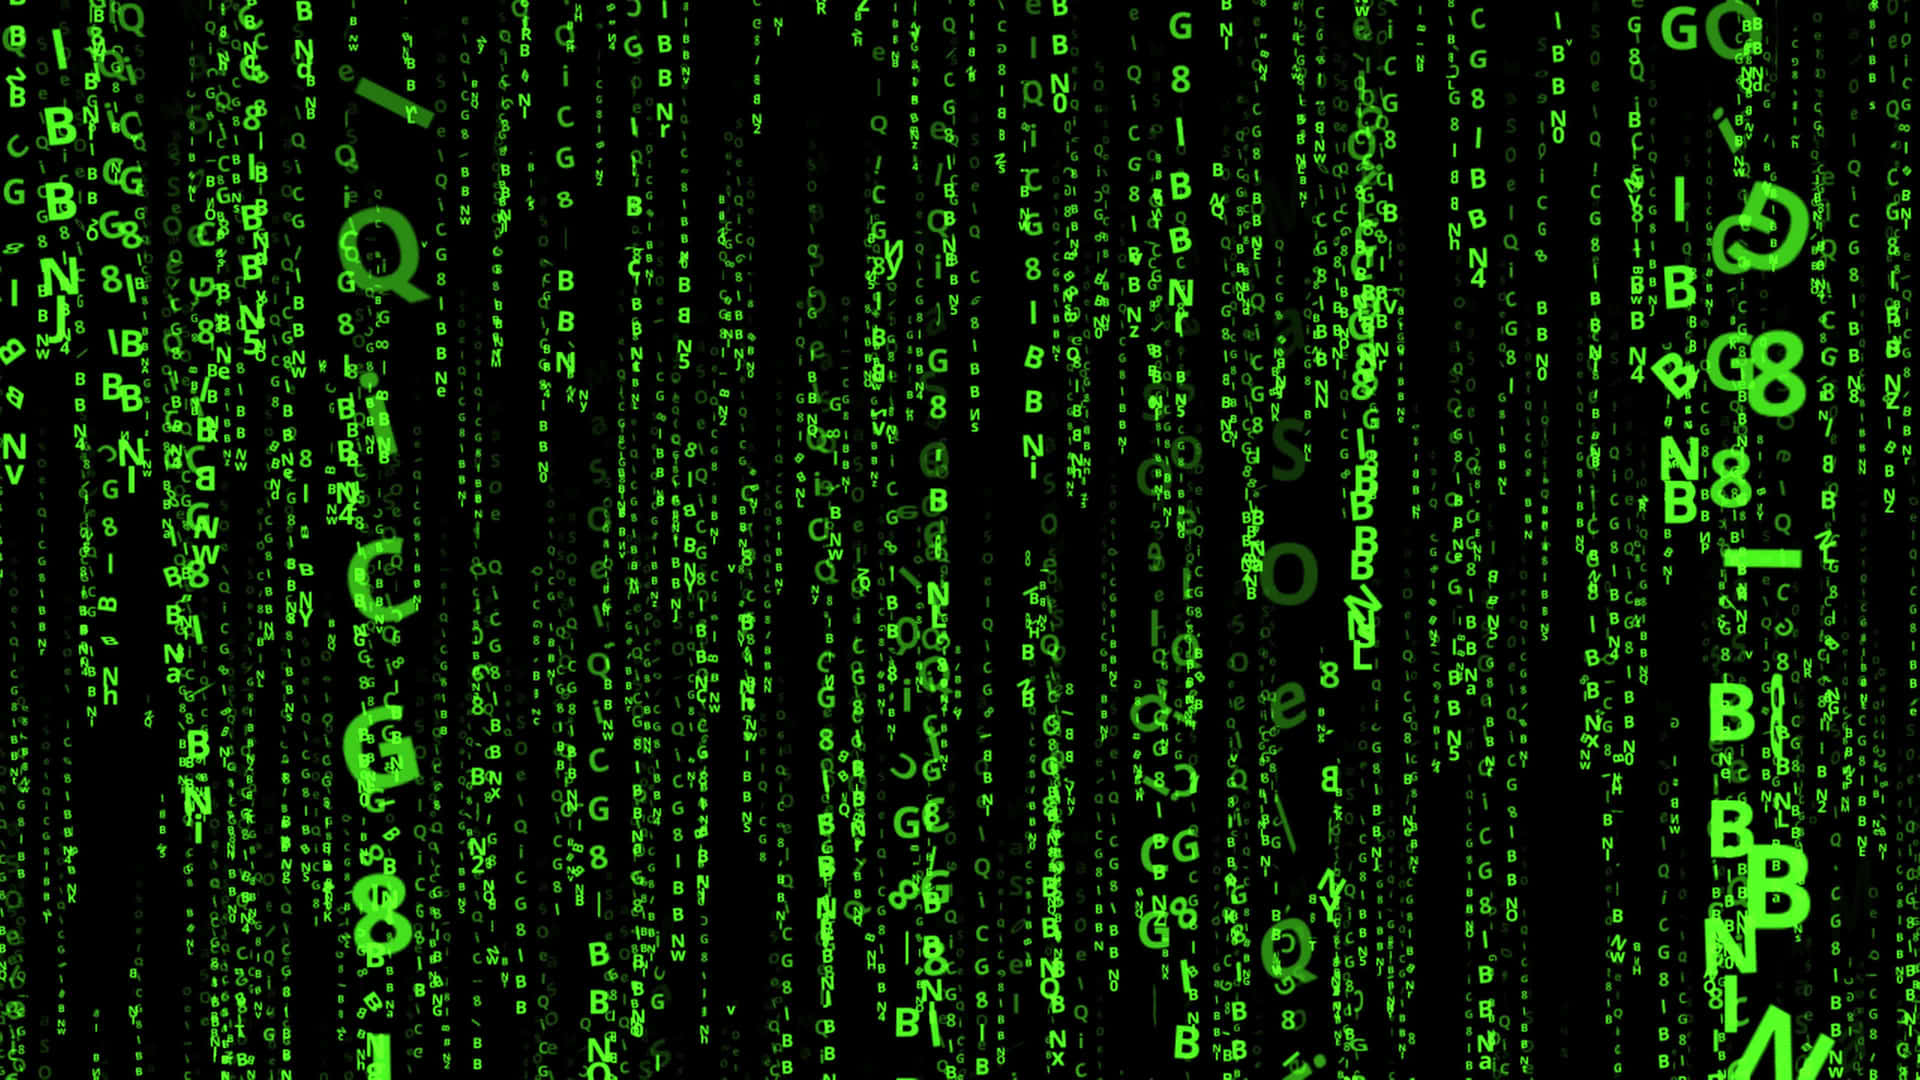 The Matrix Code In Green And Black Wallpaper